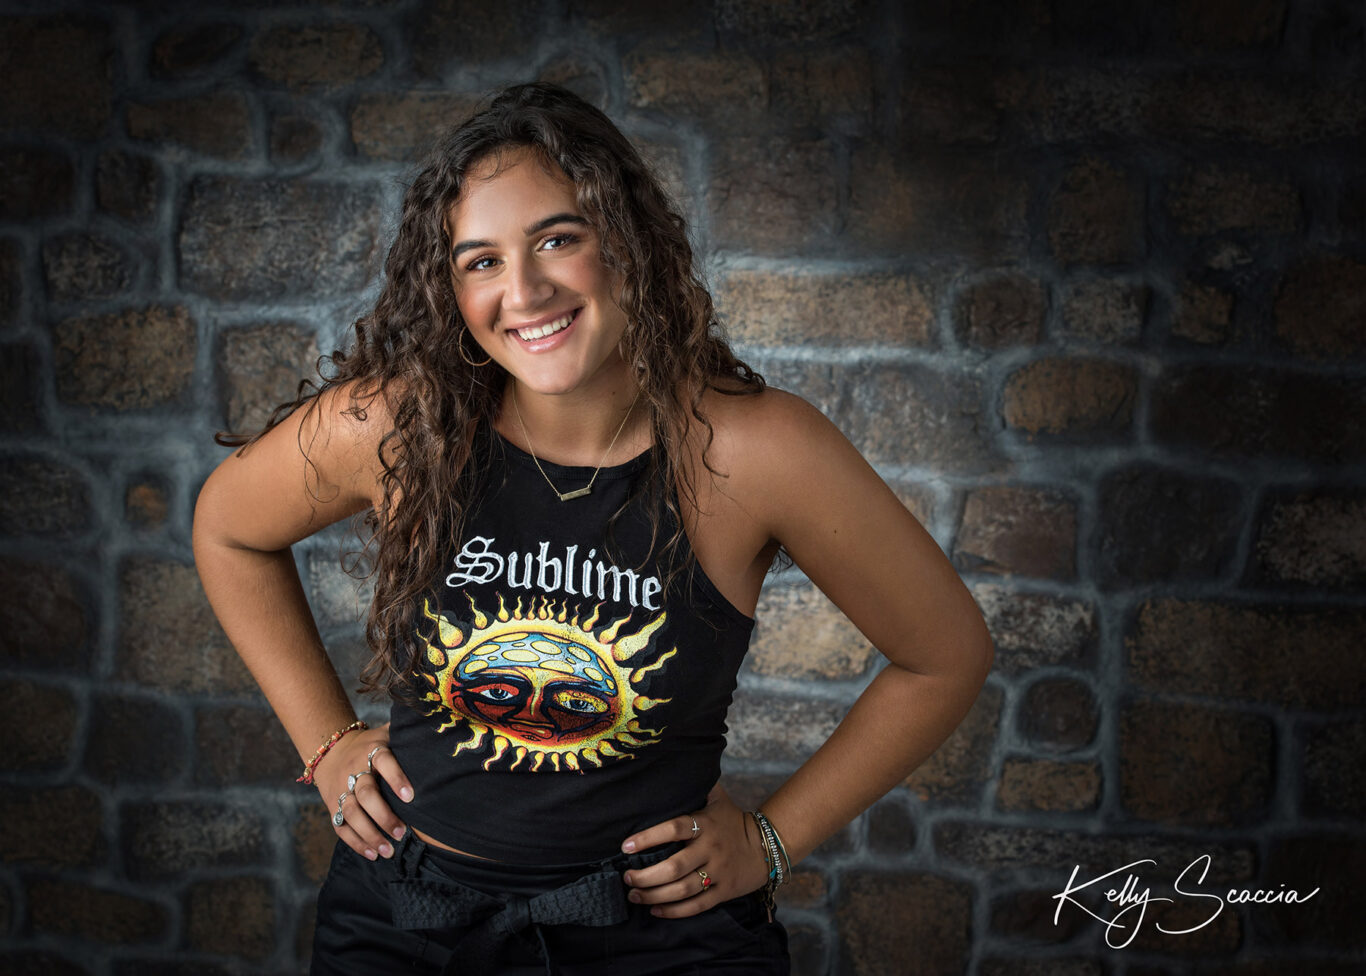 High School senior girl studio portrait in front of a brick wall wearing a Sublime sleeveless shirt smiling with hands on hips